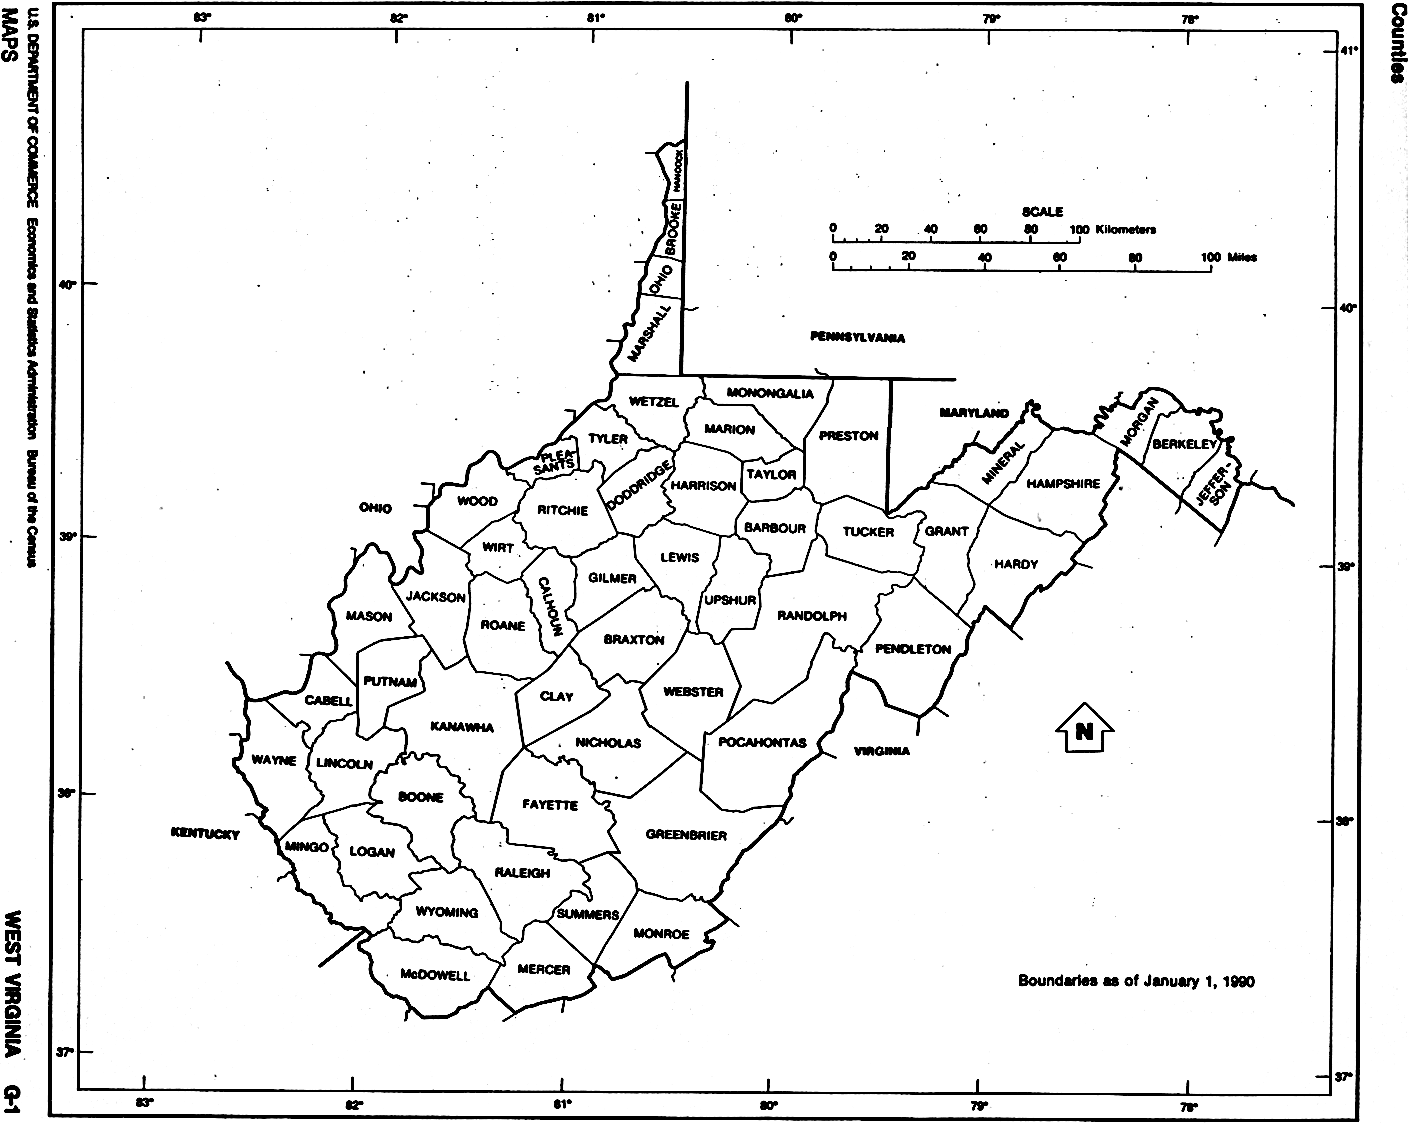 Outline Map Of The United States During The Civil War